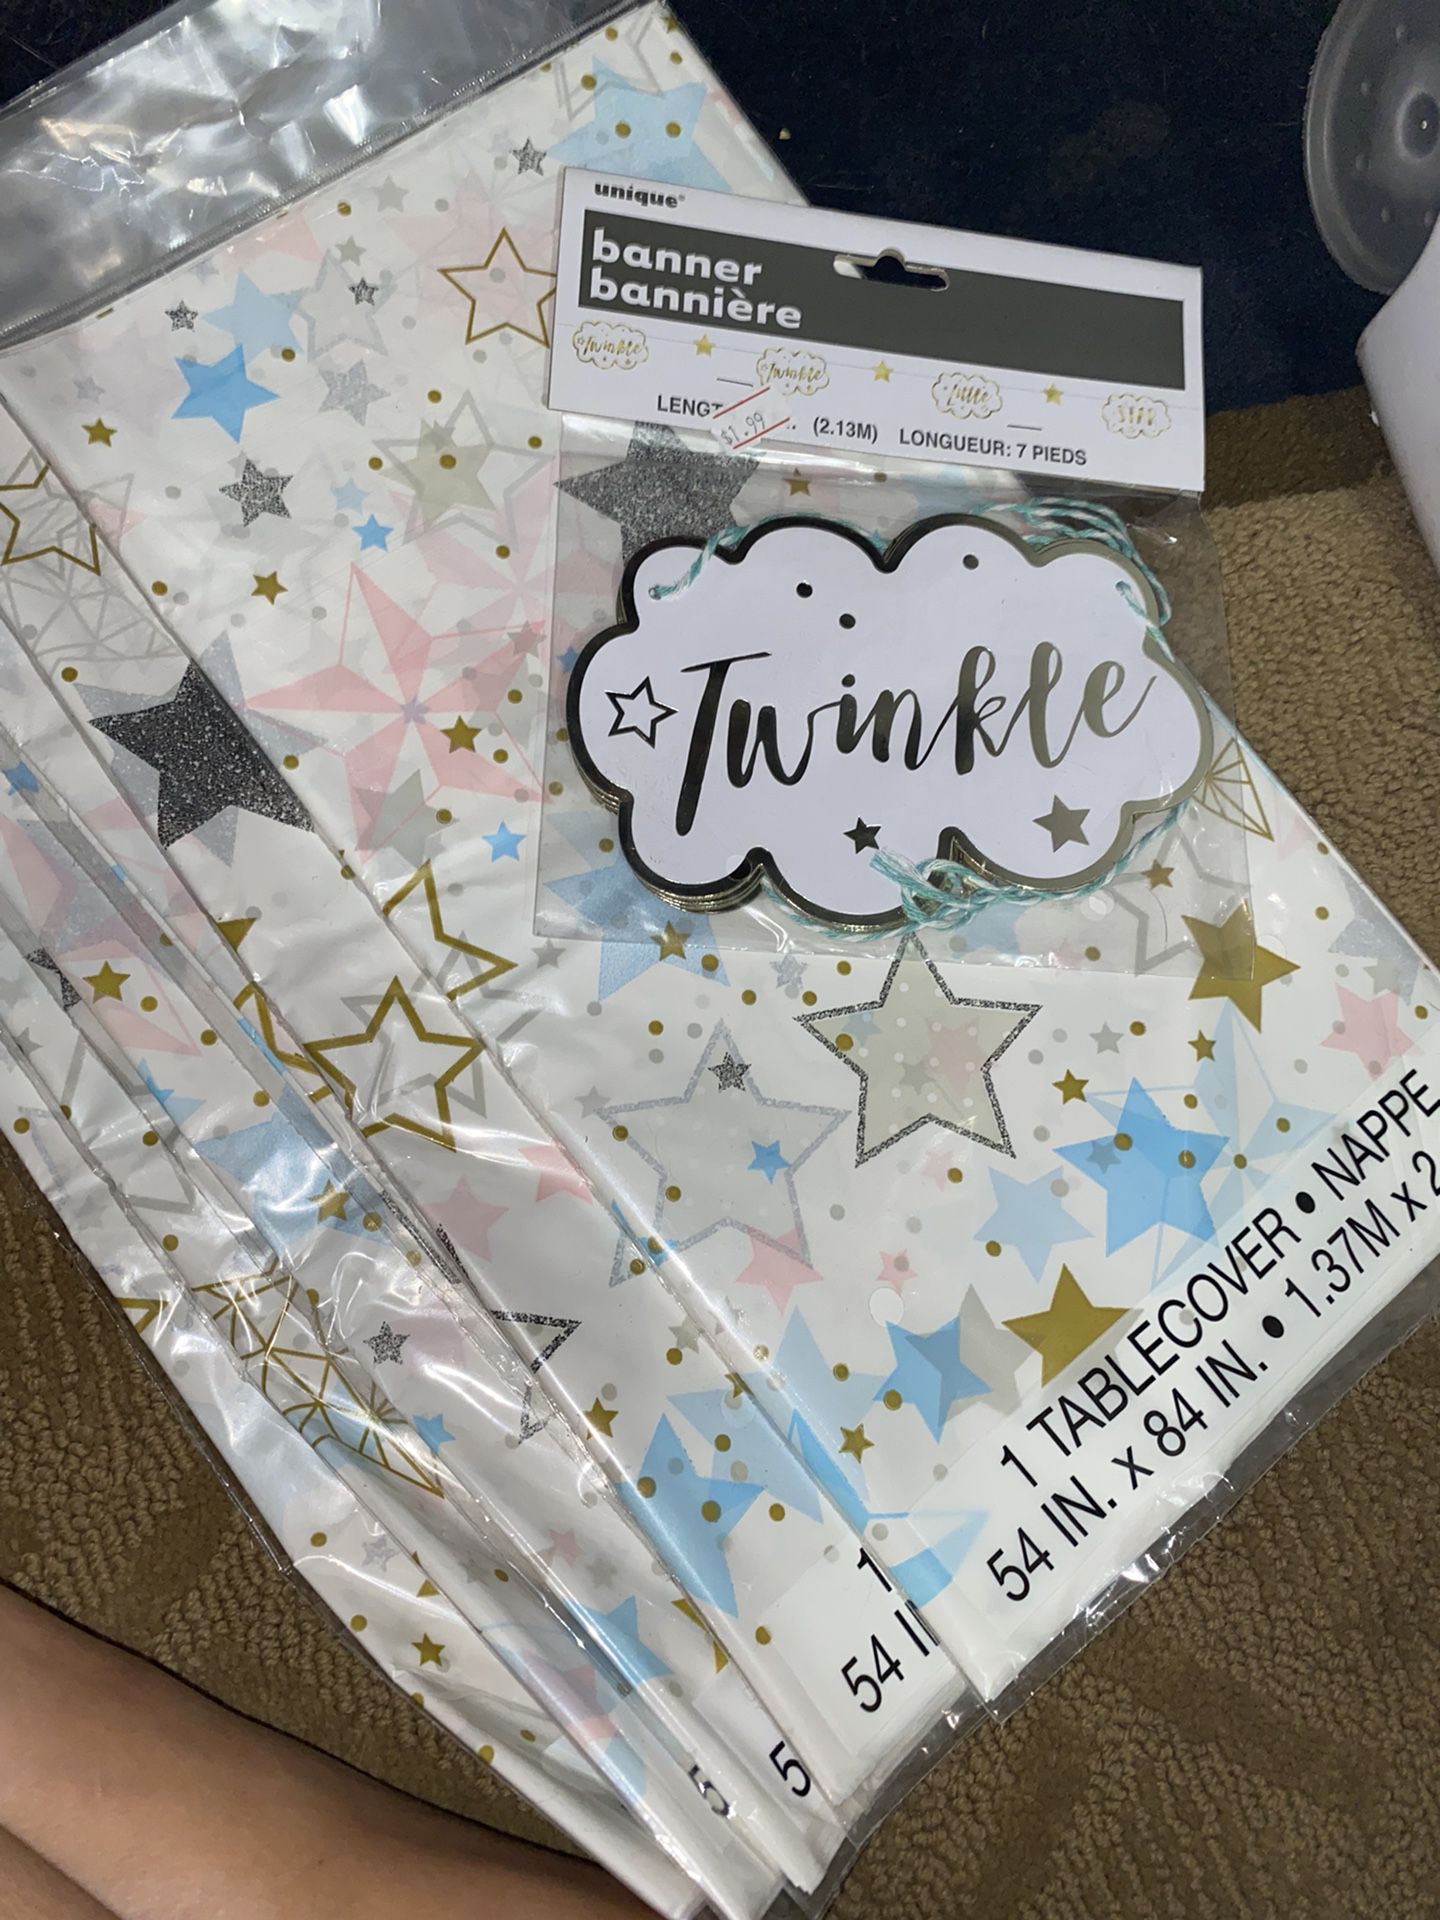 Twinkle Little Star Party Decorations